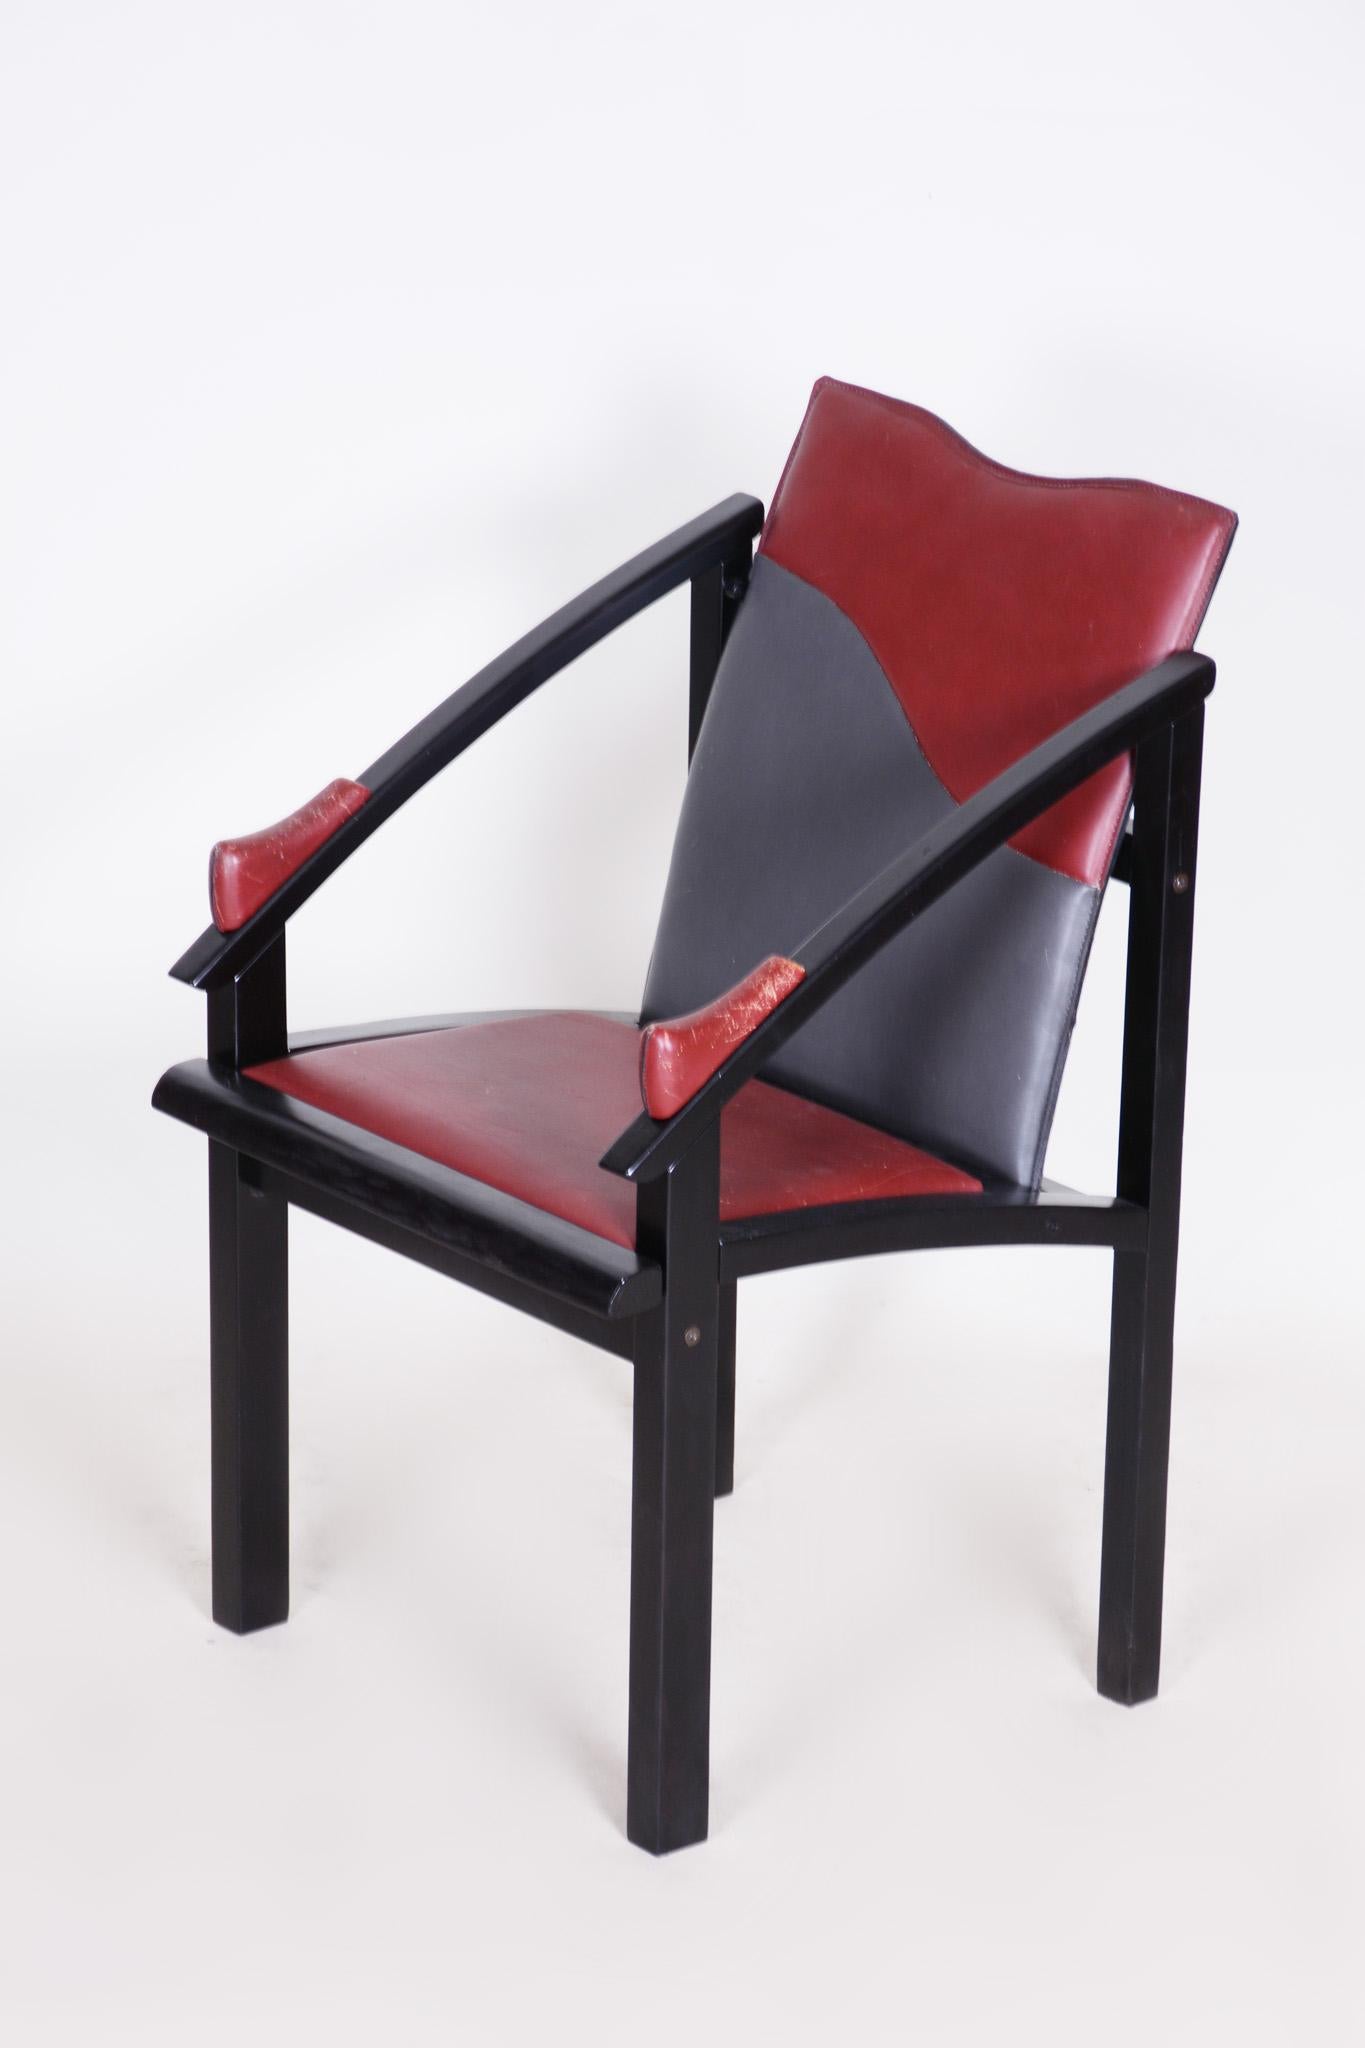 20th Century 1970s Armchair Made in Europe, Made Out of Lacquered Wood and Leather, Original For Sale